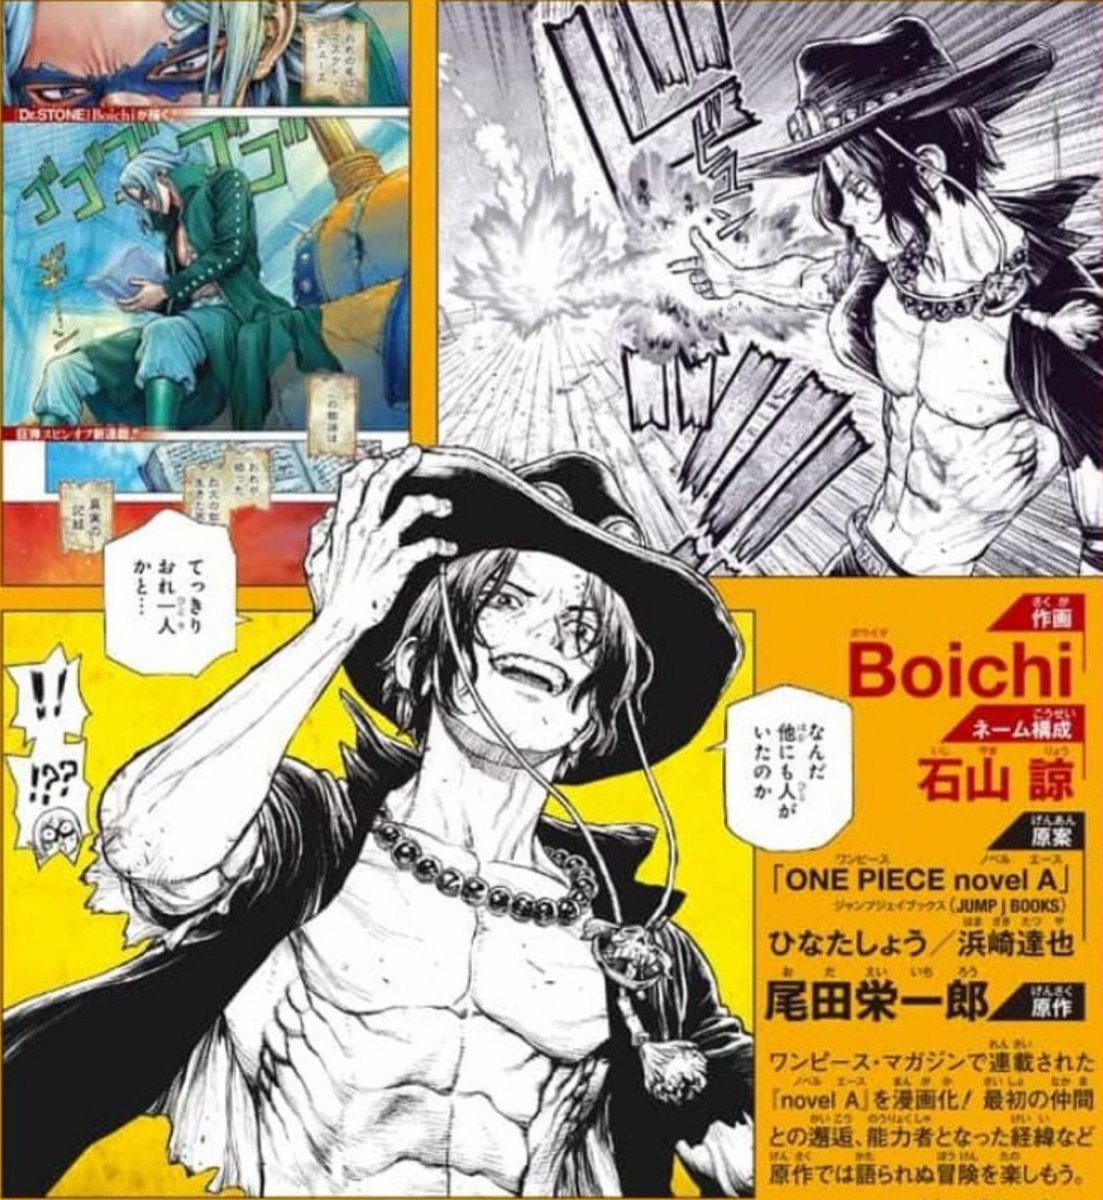 Artur Library Of Ohara Official Preview Of Some Pages From The Upcoming Canon Ace Spin Off By Boichi